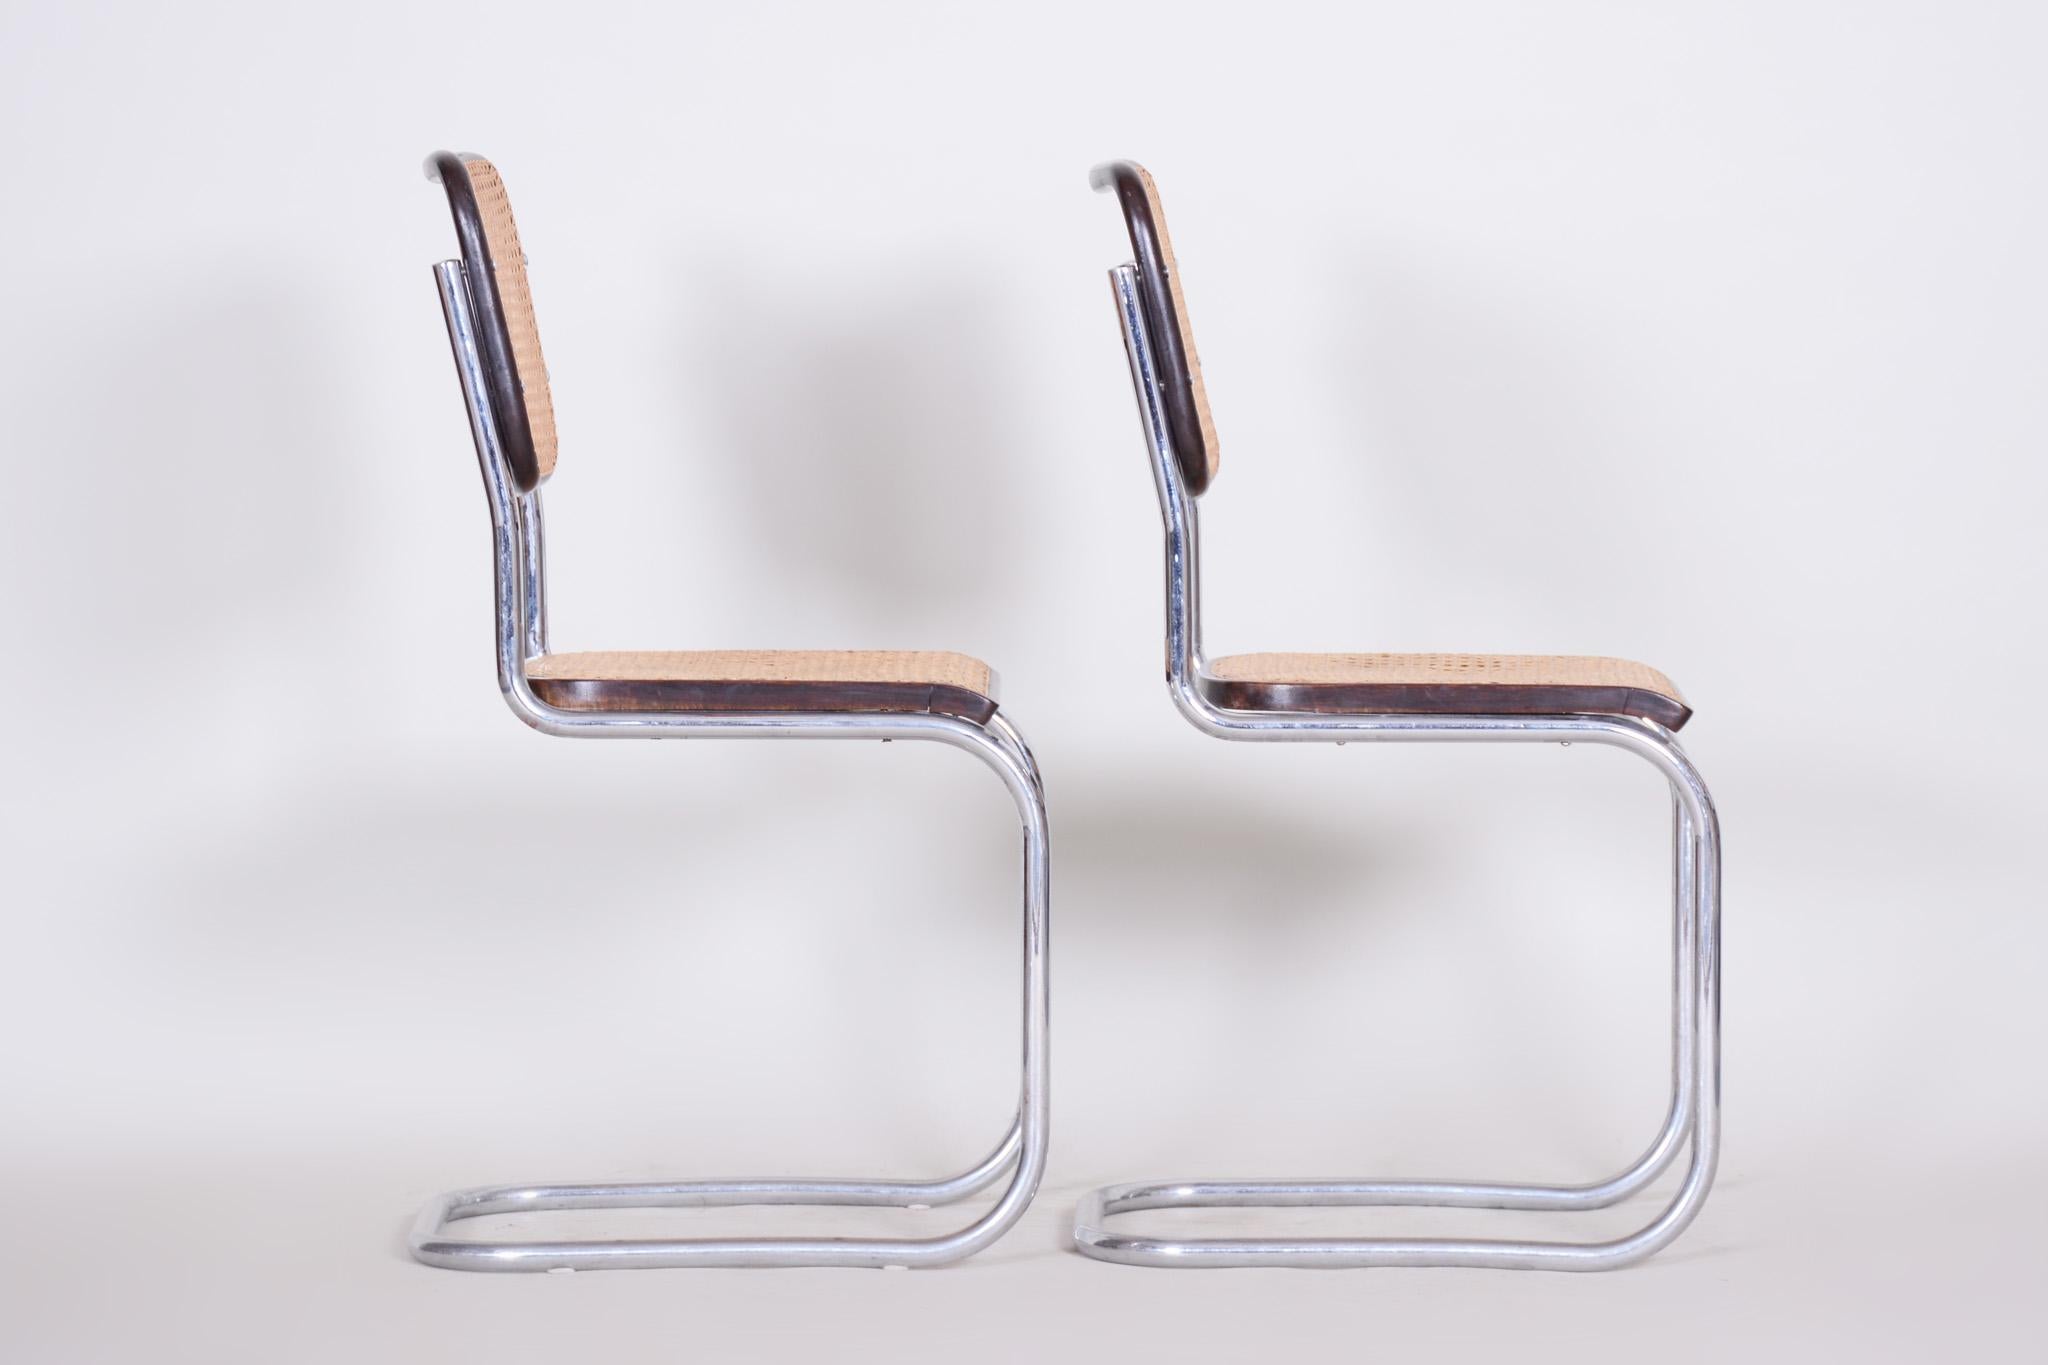 Vintage Tubular Chrome Ratan Bauhaus Pair of Chairs by Marcel Breuer, 1930s In Good Condition For Sale In Horomerice, CZ